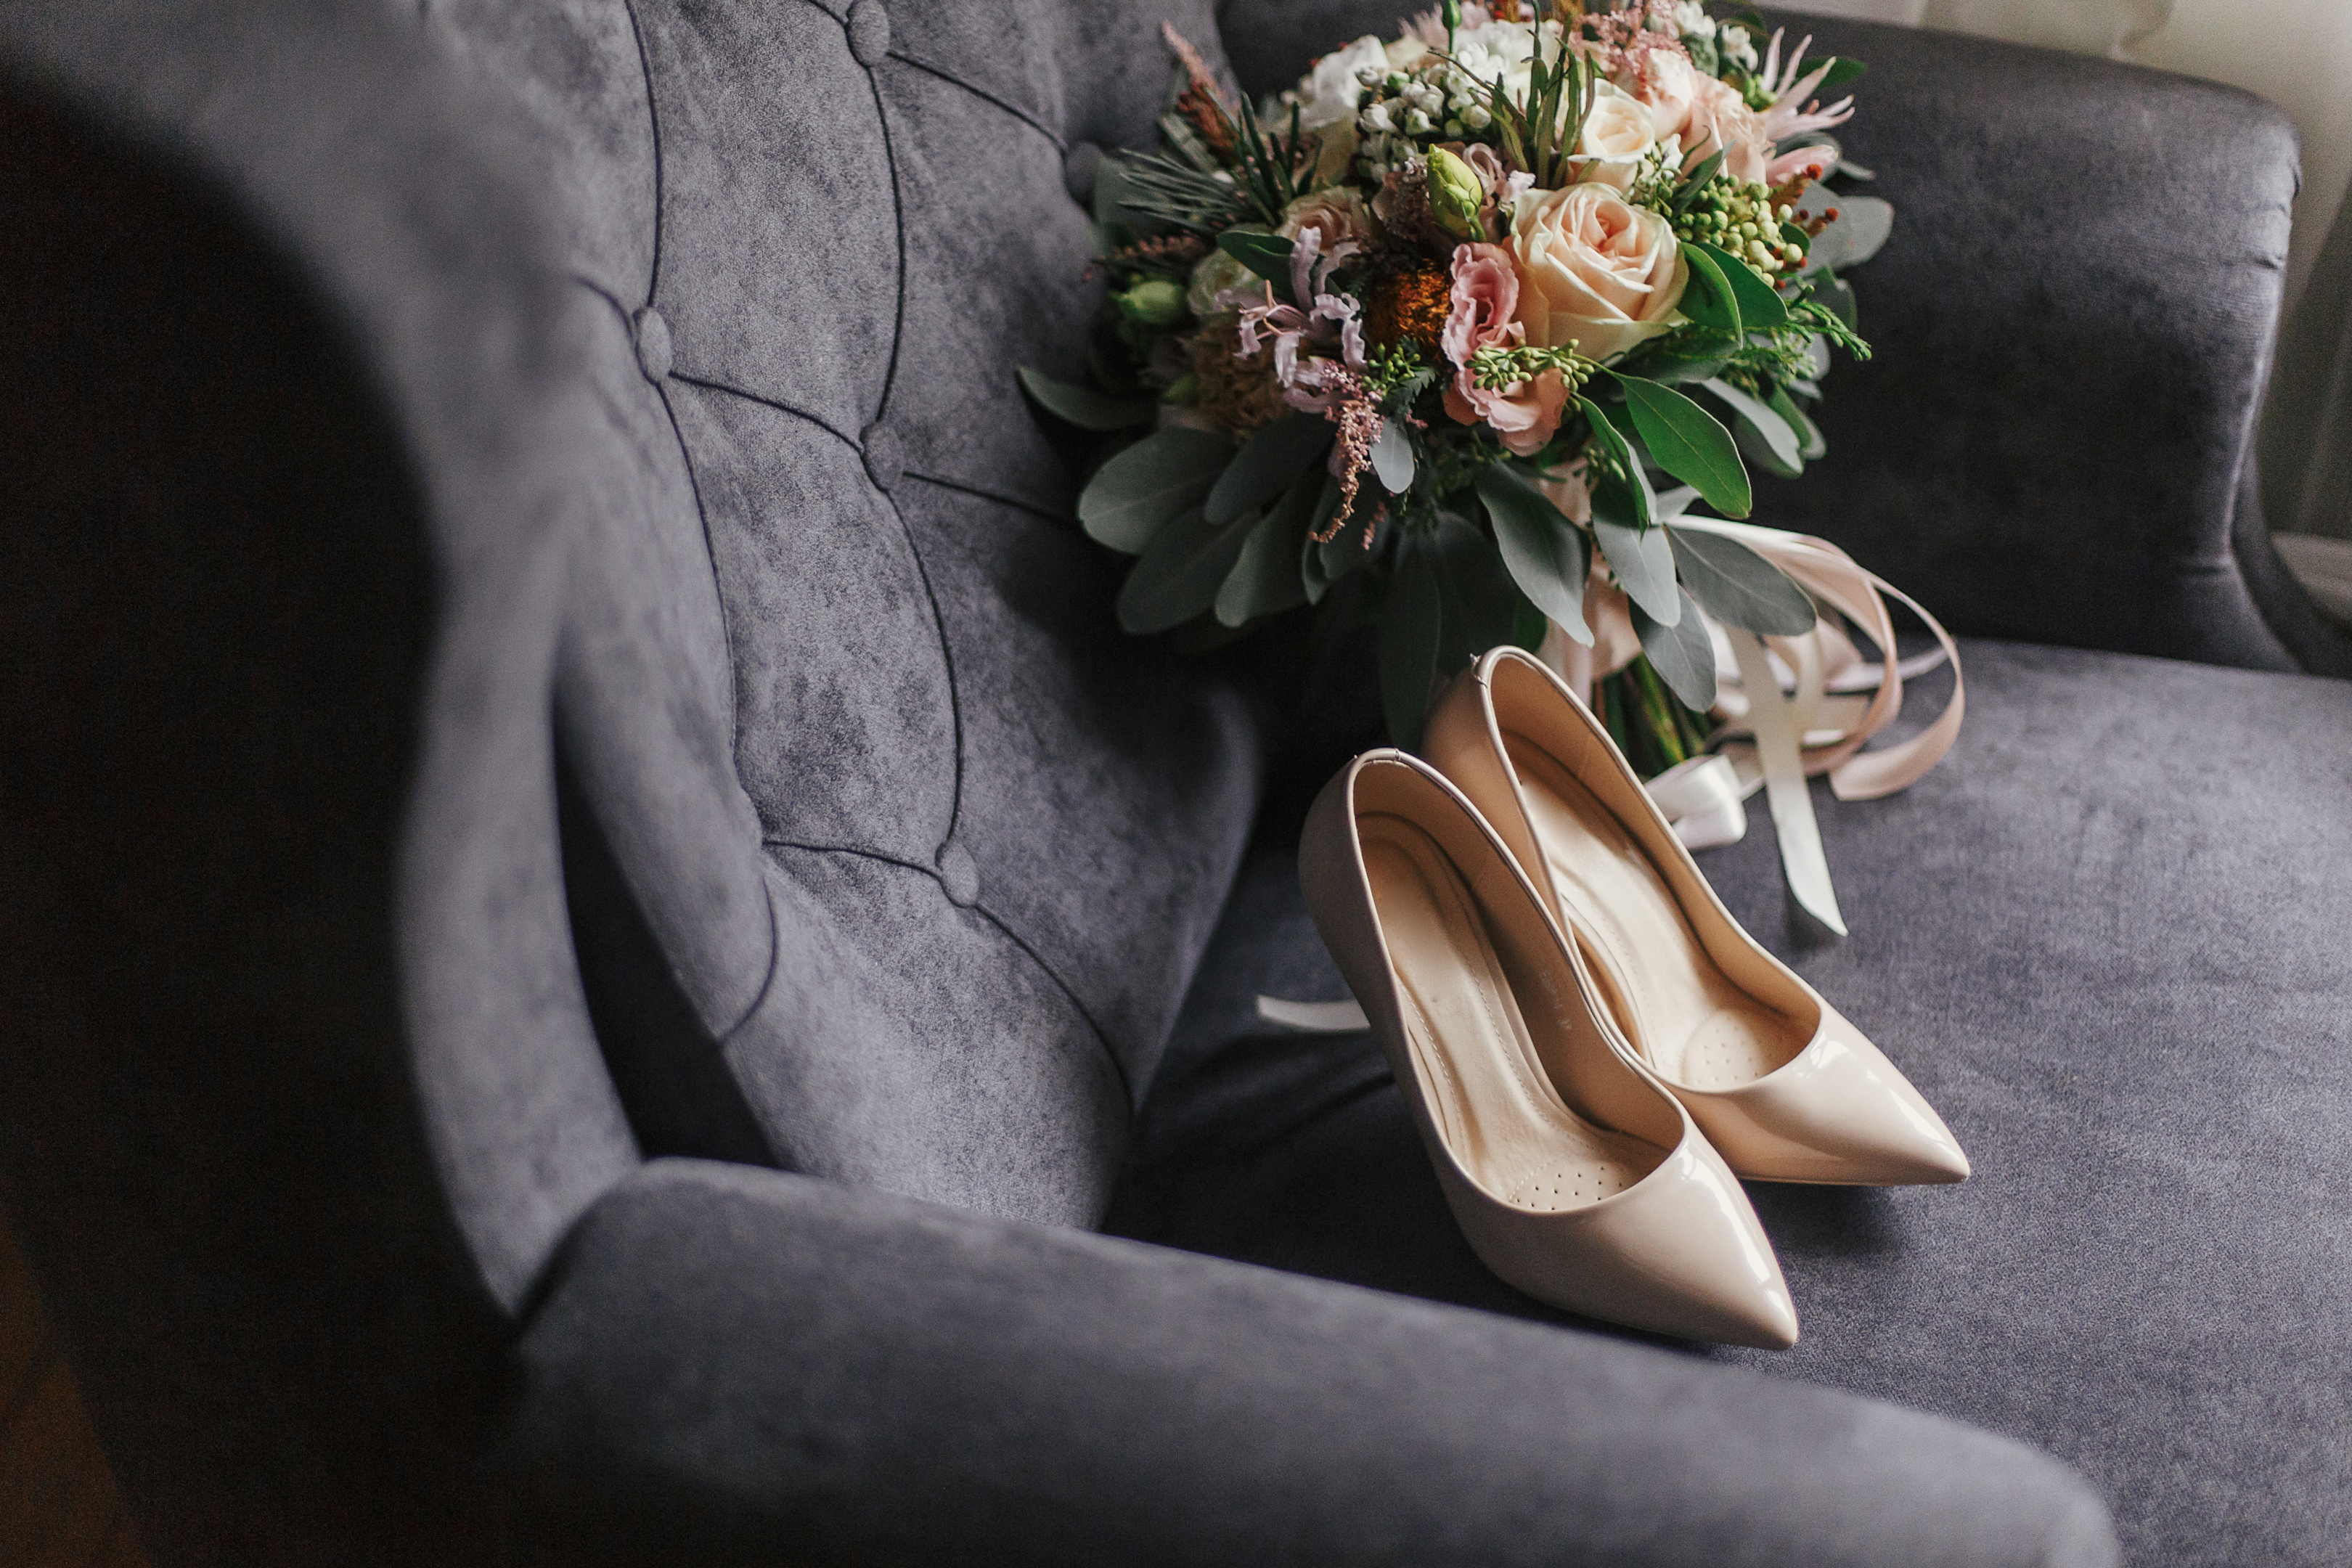 Wedding shoes and bouquet on gray furniture